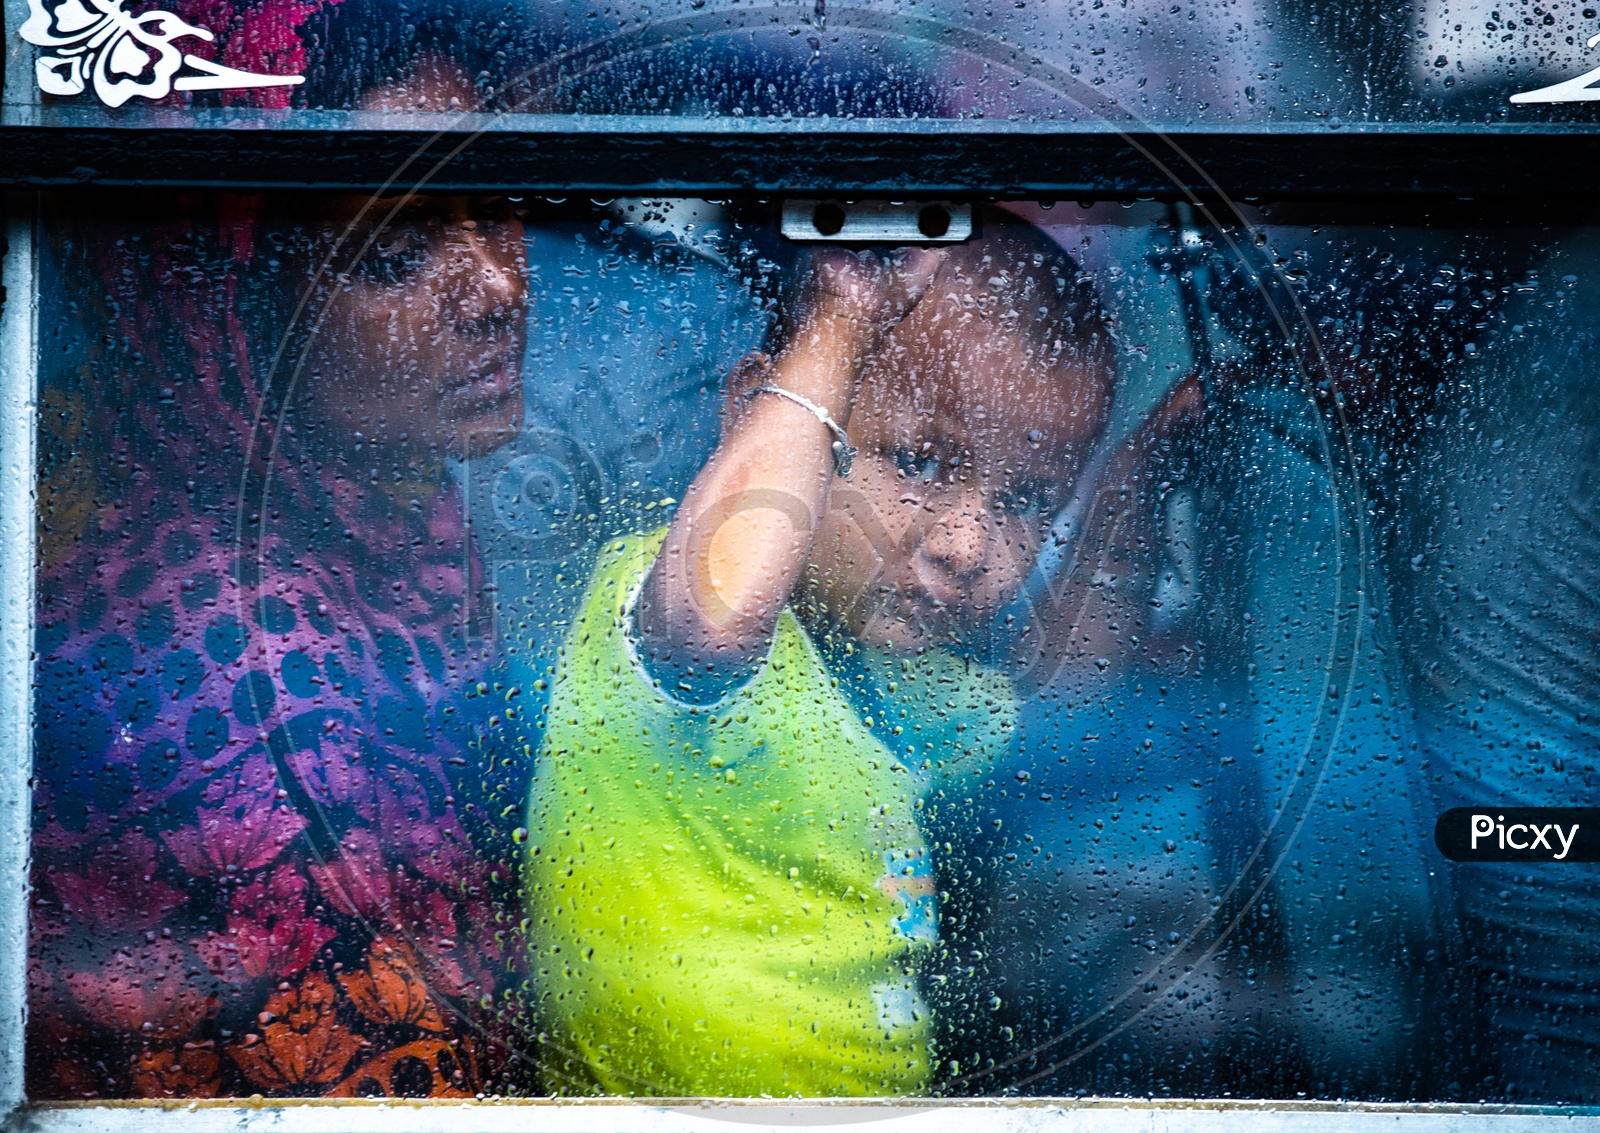 A Small  Child Looking Through The  Window Glass Of a   Bus While The  Rain Lashing Outside